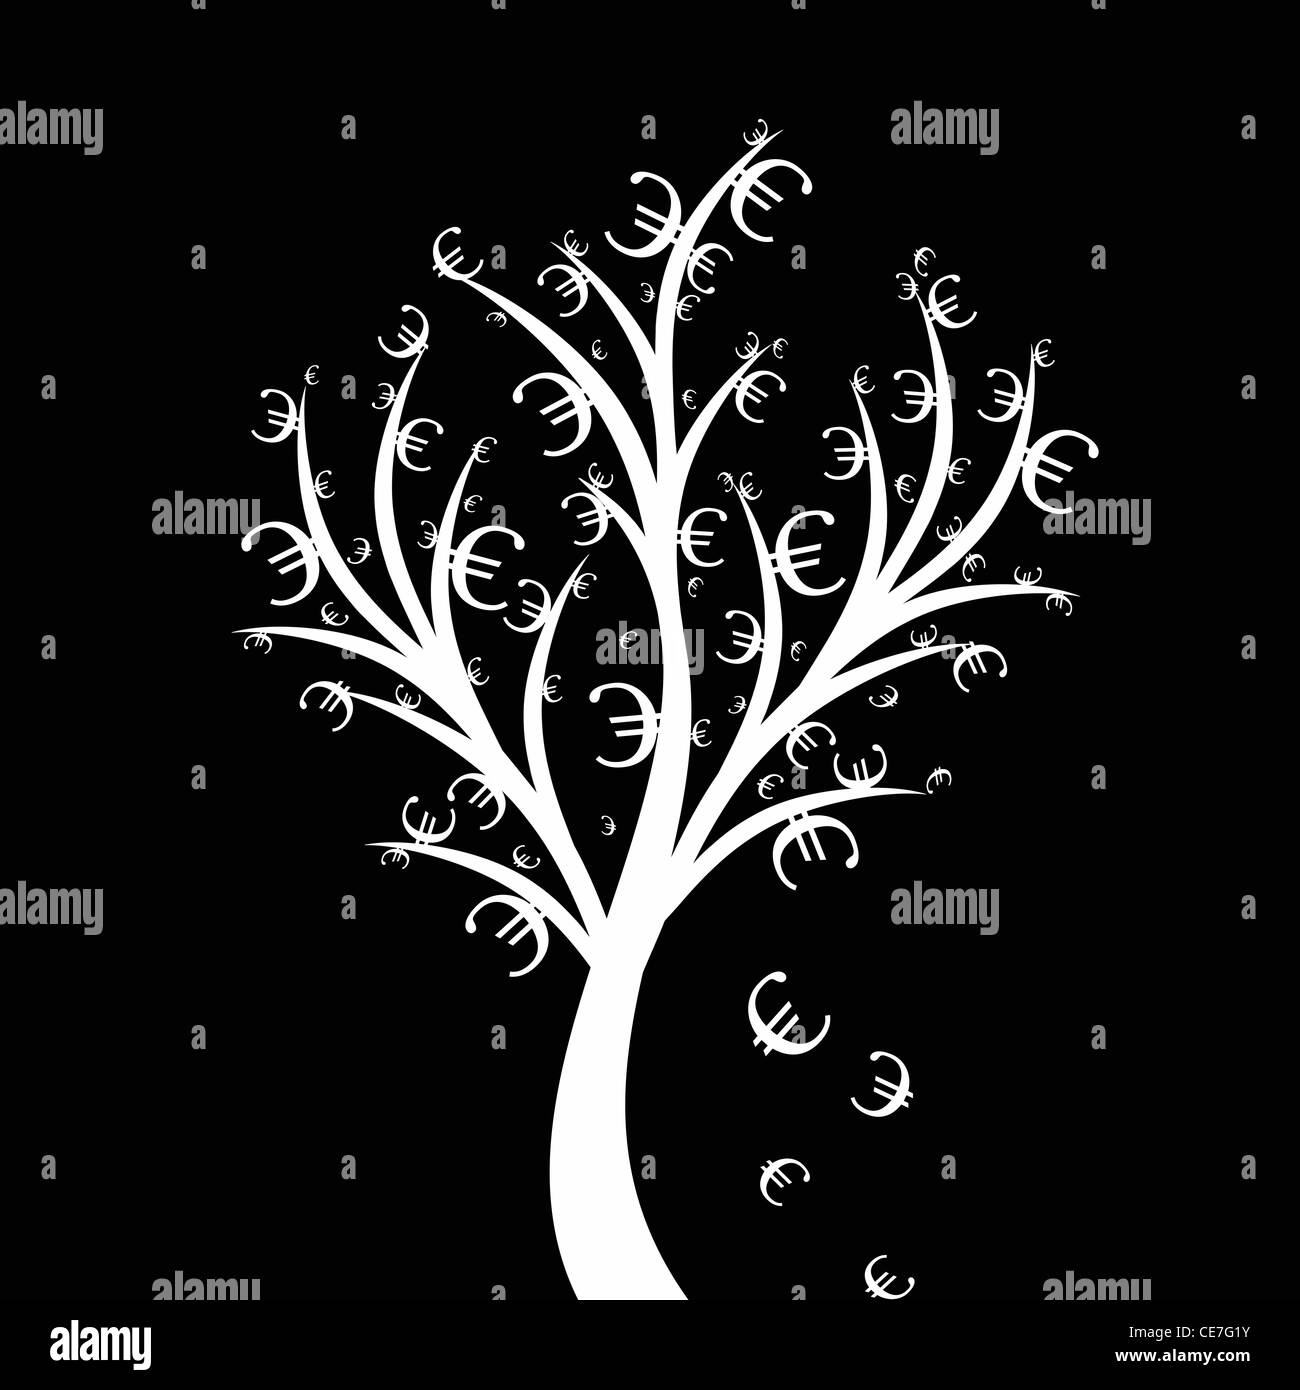 Abstract money tree with euro symbol isolated on black background Stock Photo